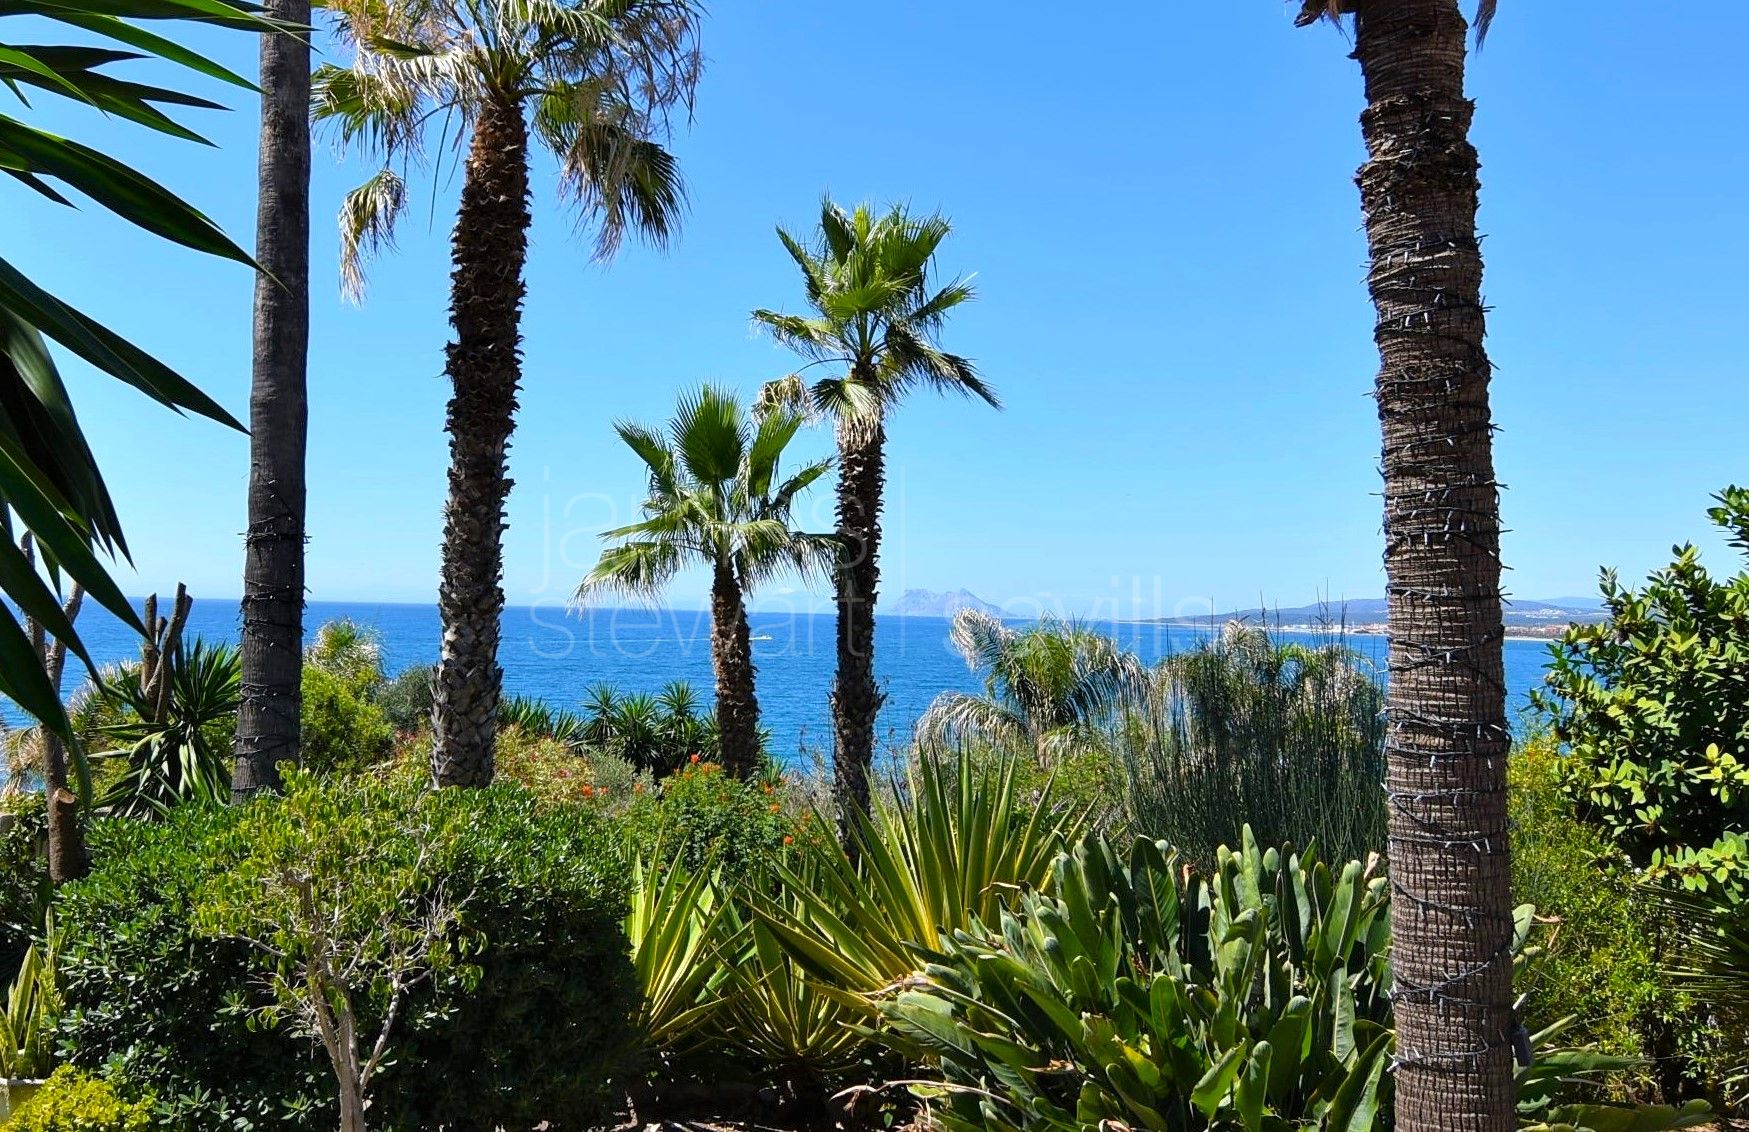 A hidden gem only a 60m walk to the beach with lovely sea views